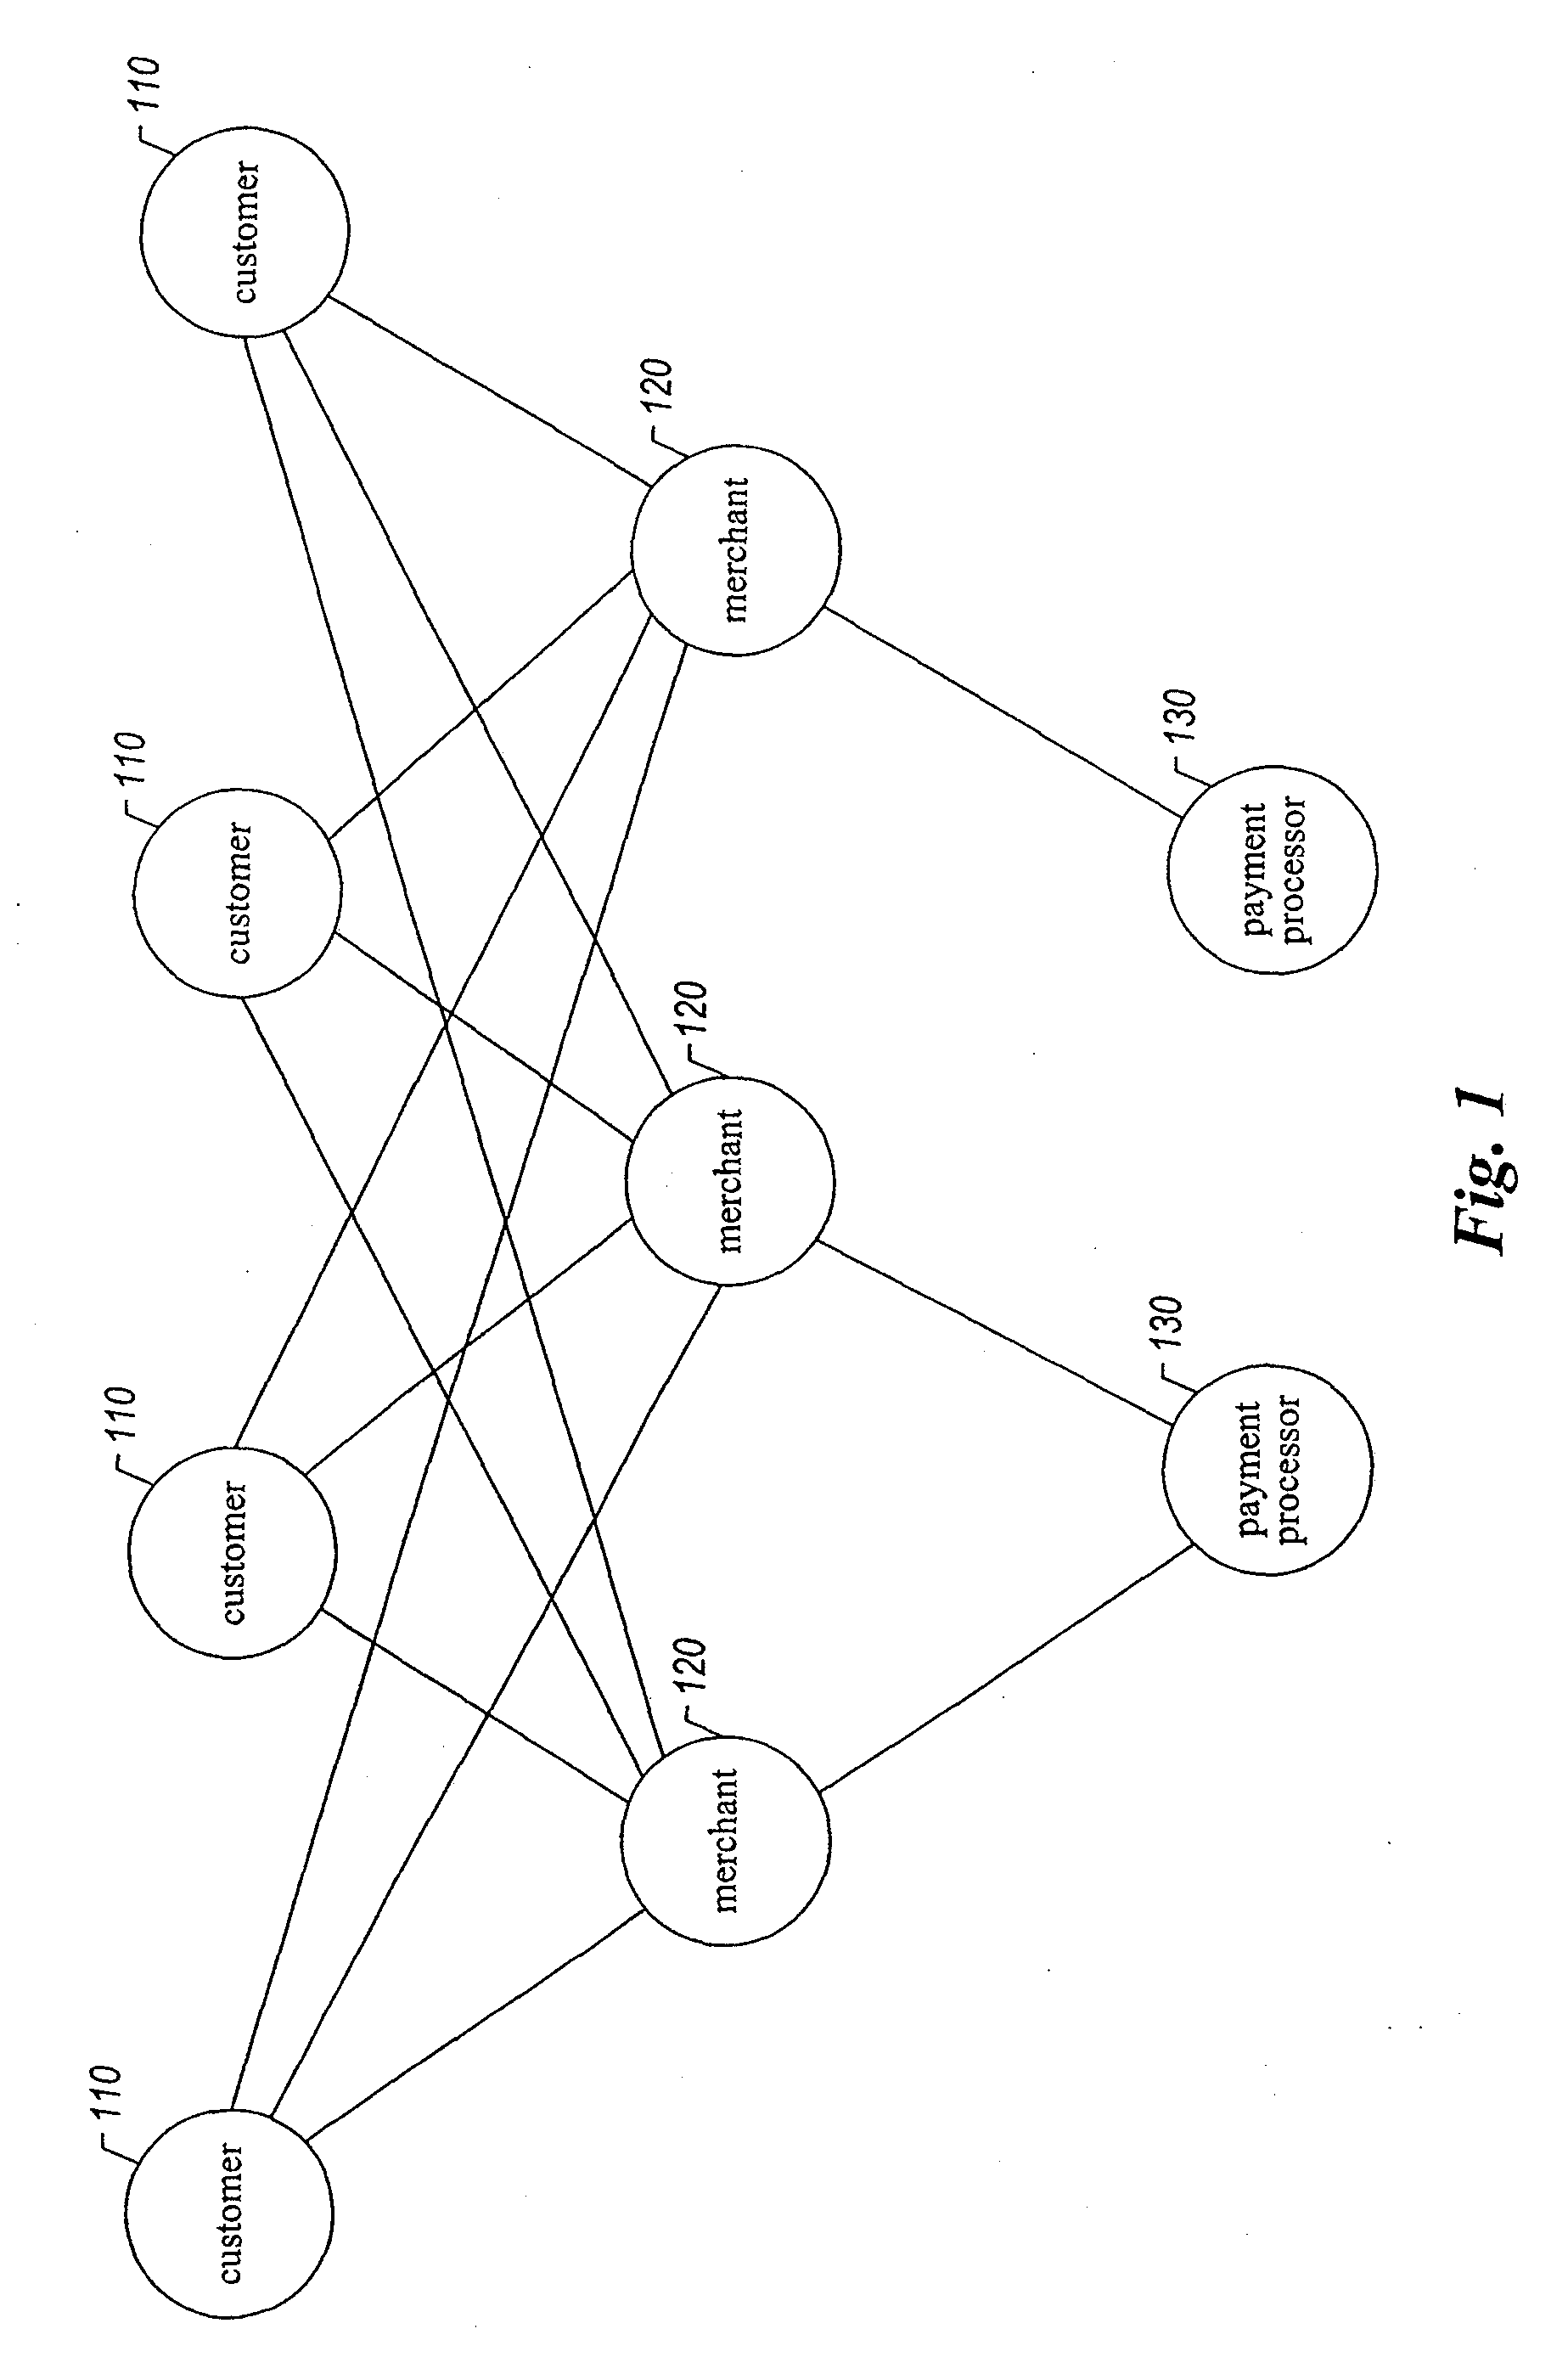 Method and apparatus for integrated payments processing and decisioning for internet transactions